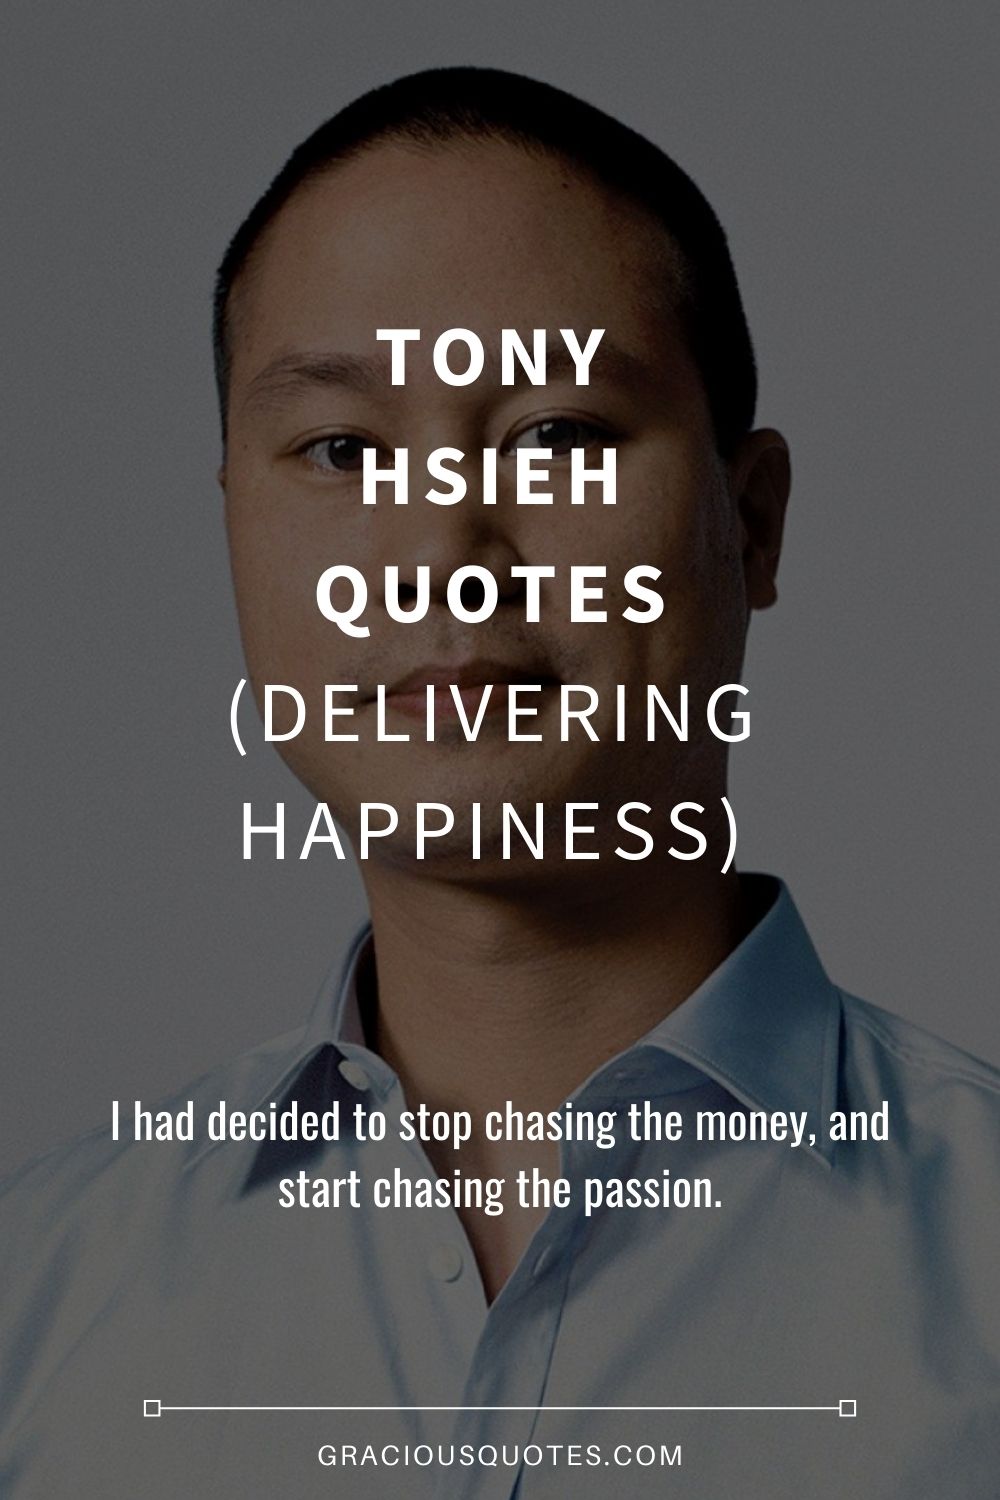 Tony Hsieh Quotes (DELIVERING HAPPINESS) - Gracious Quotes